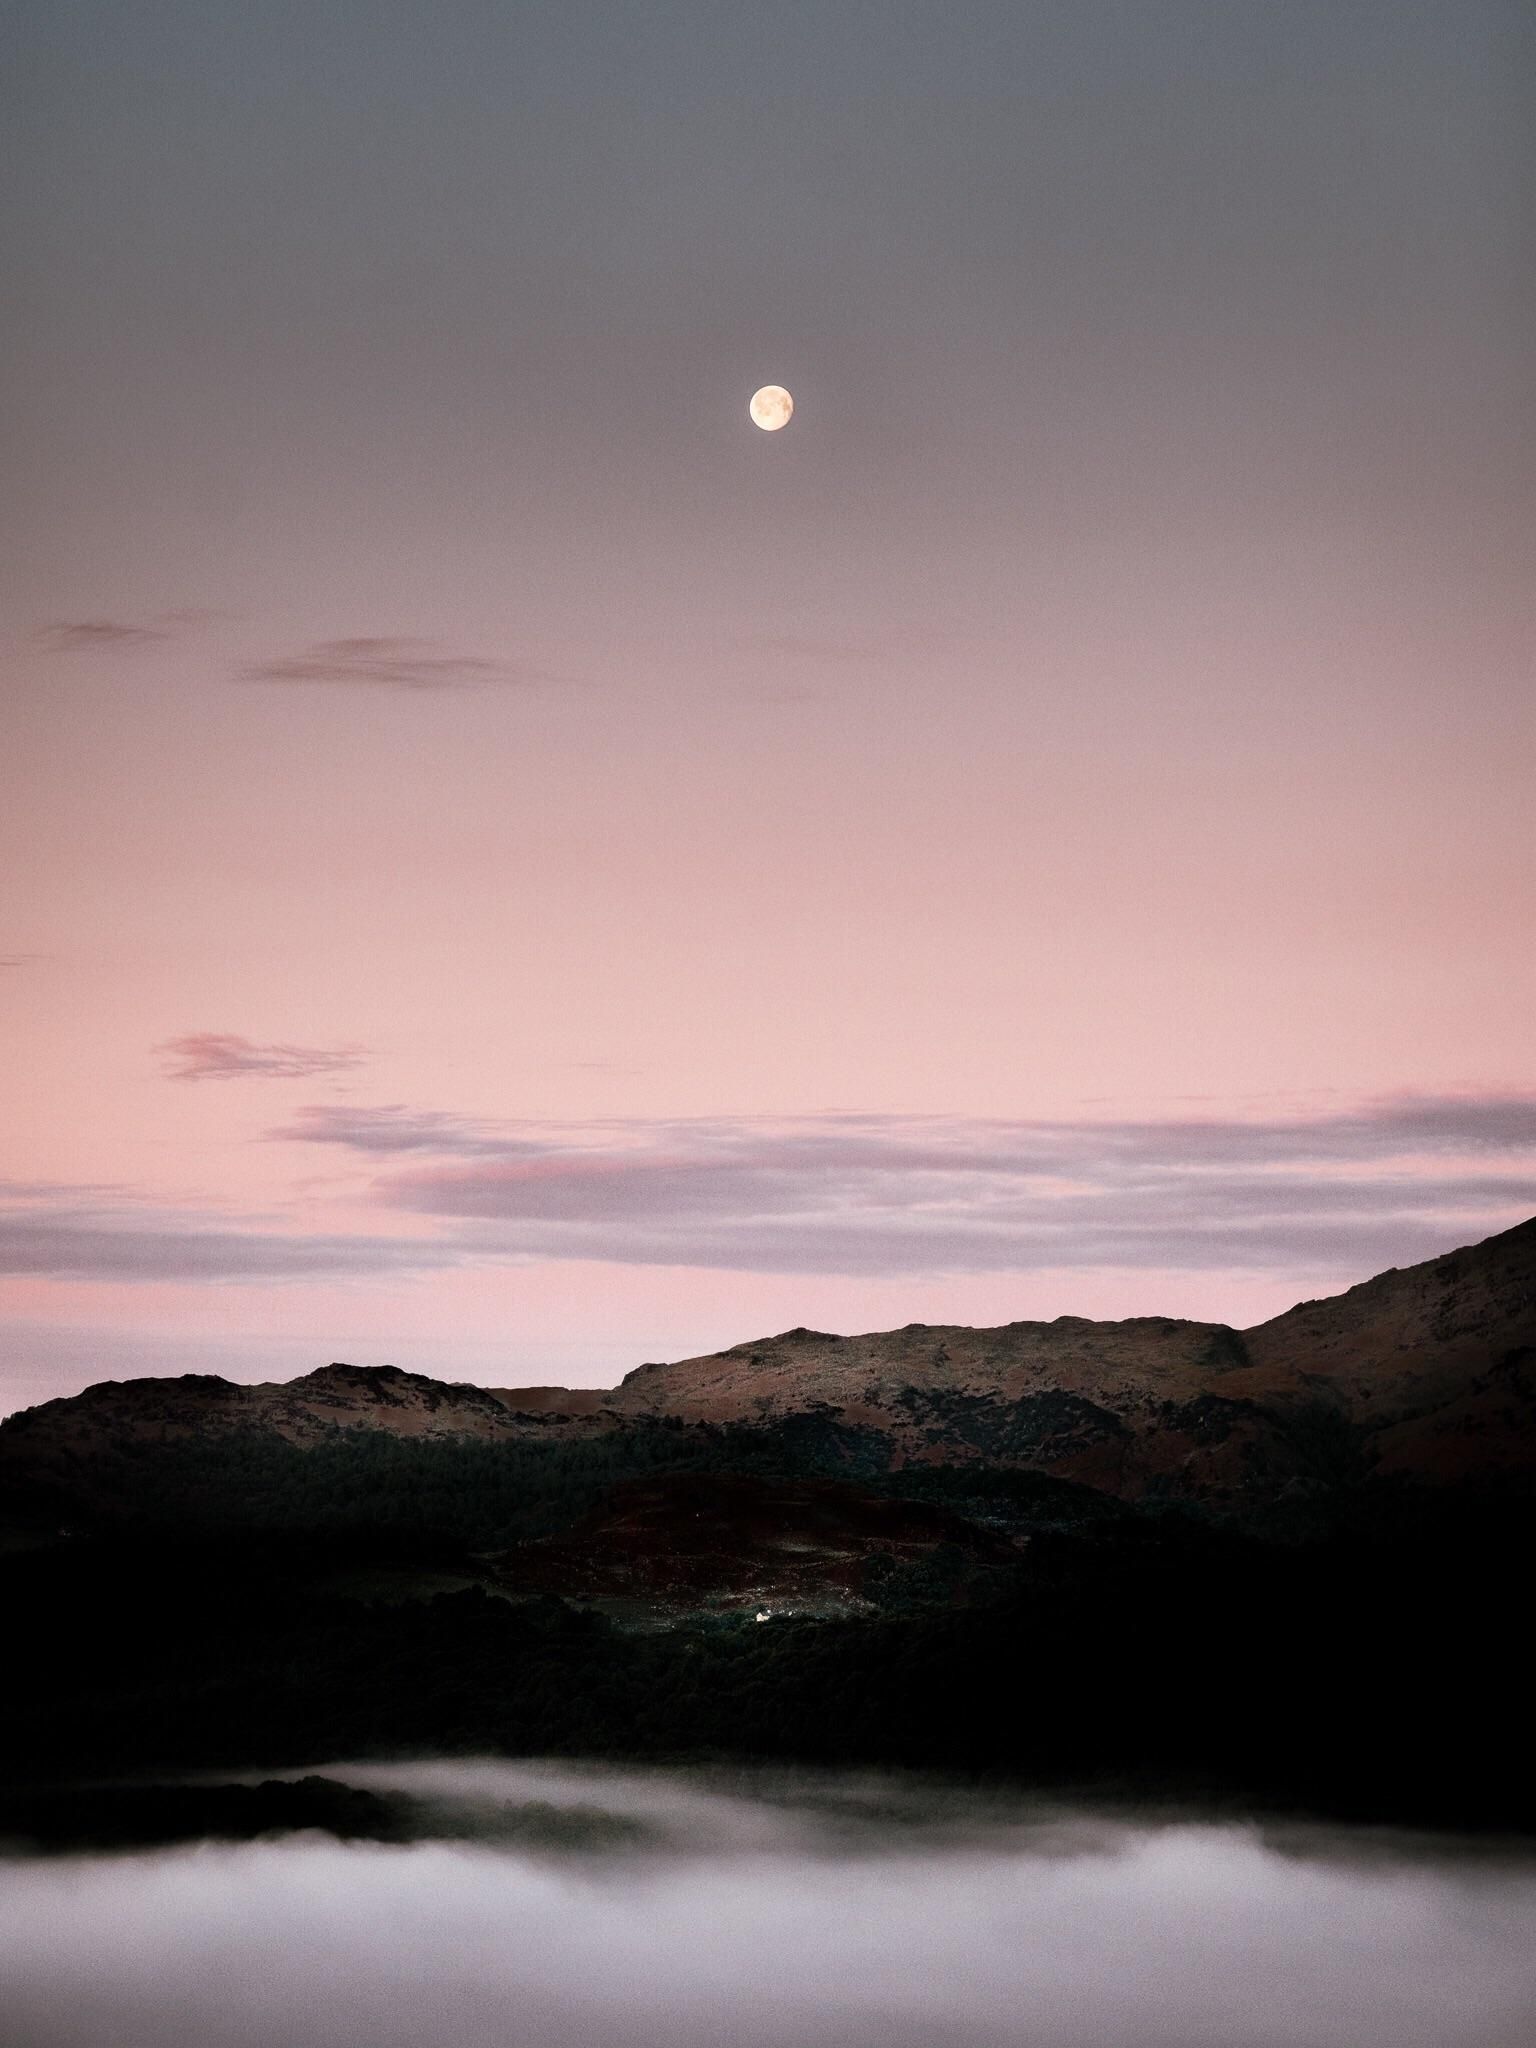 Moonrise over the Lakeland Mountains [OC] [1536x2048] Want an iPad